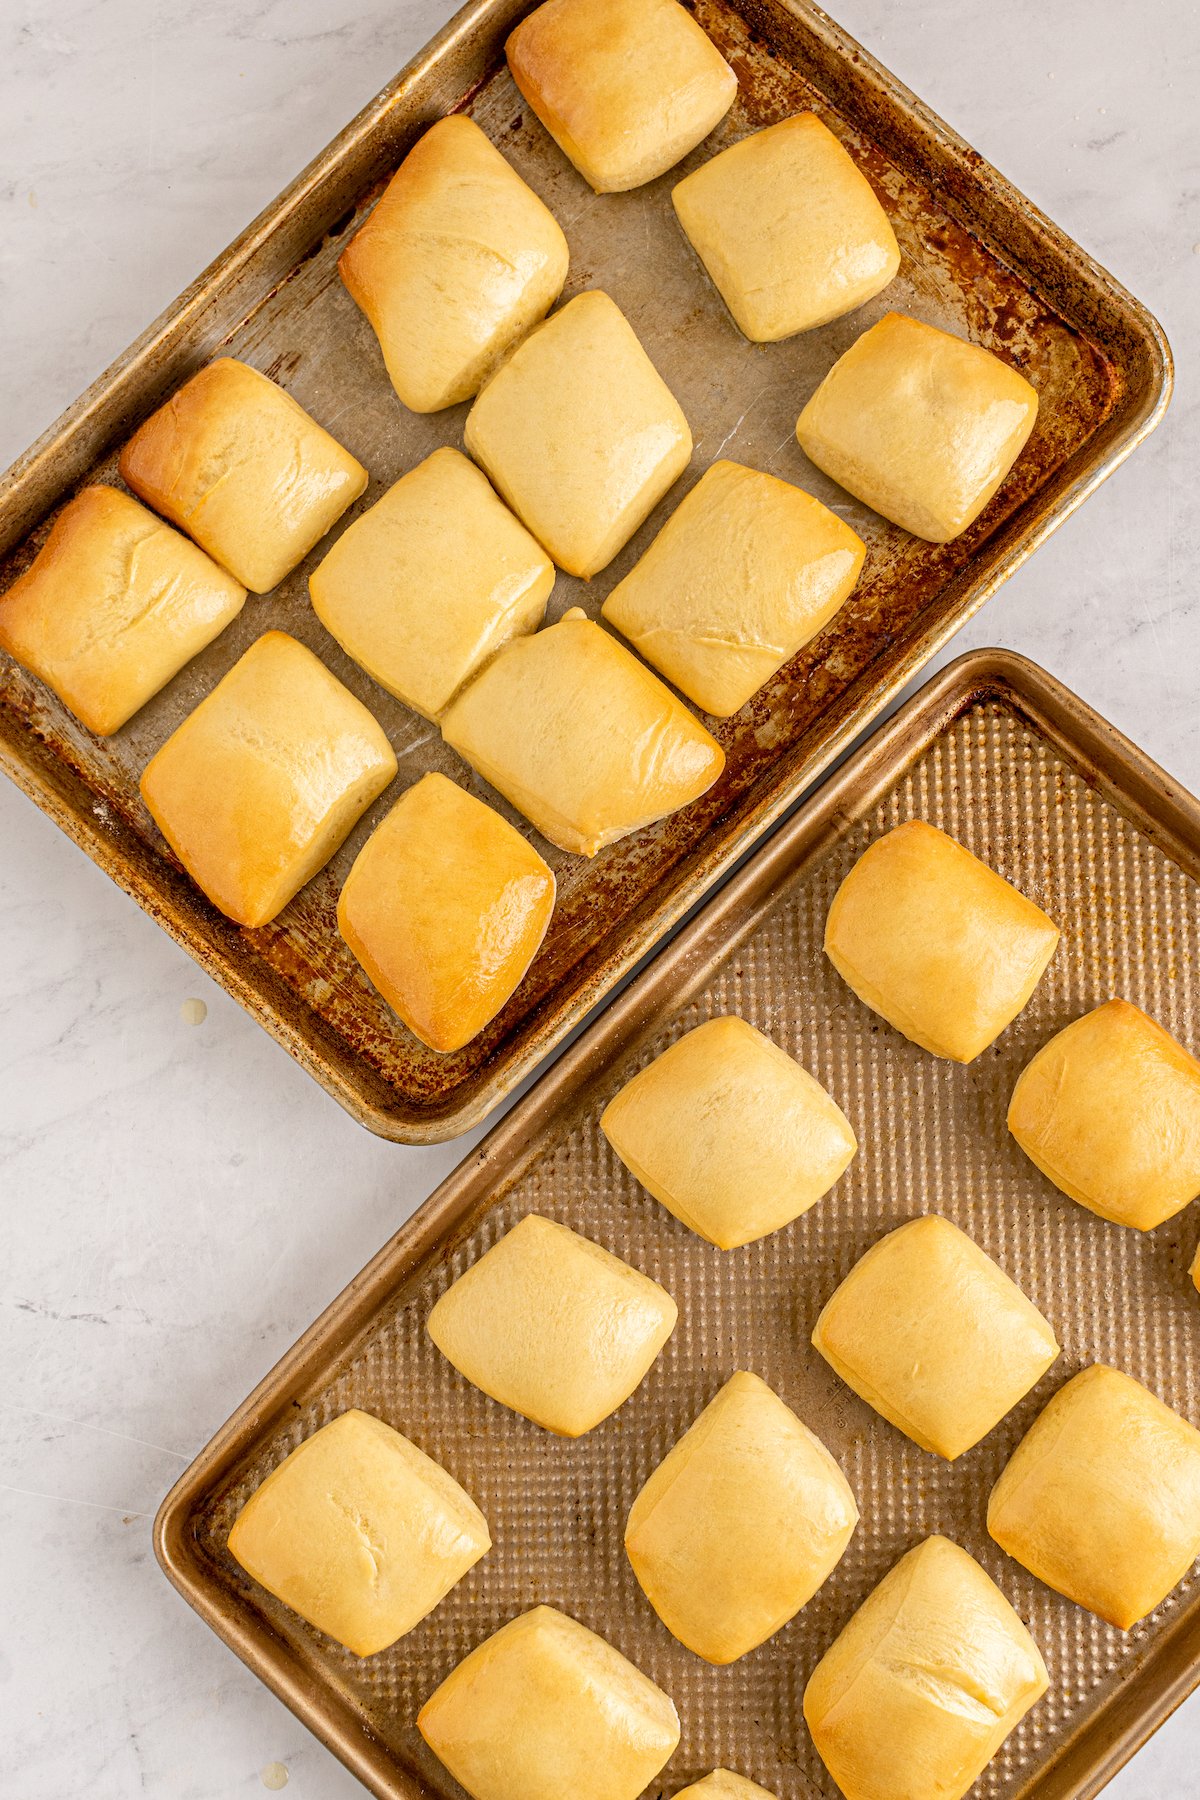 Golden-brown, baked yeast rolls on baking sheets.